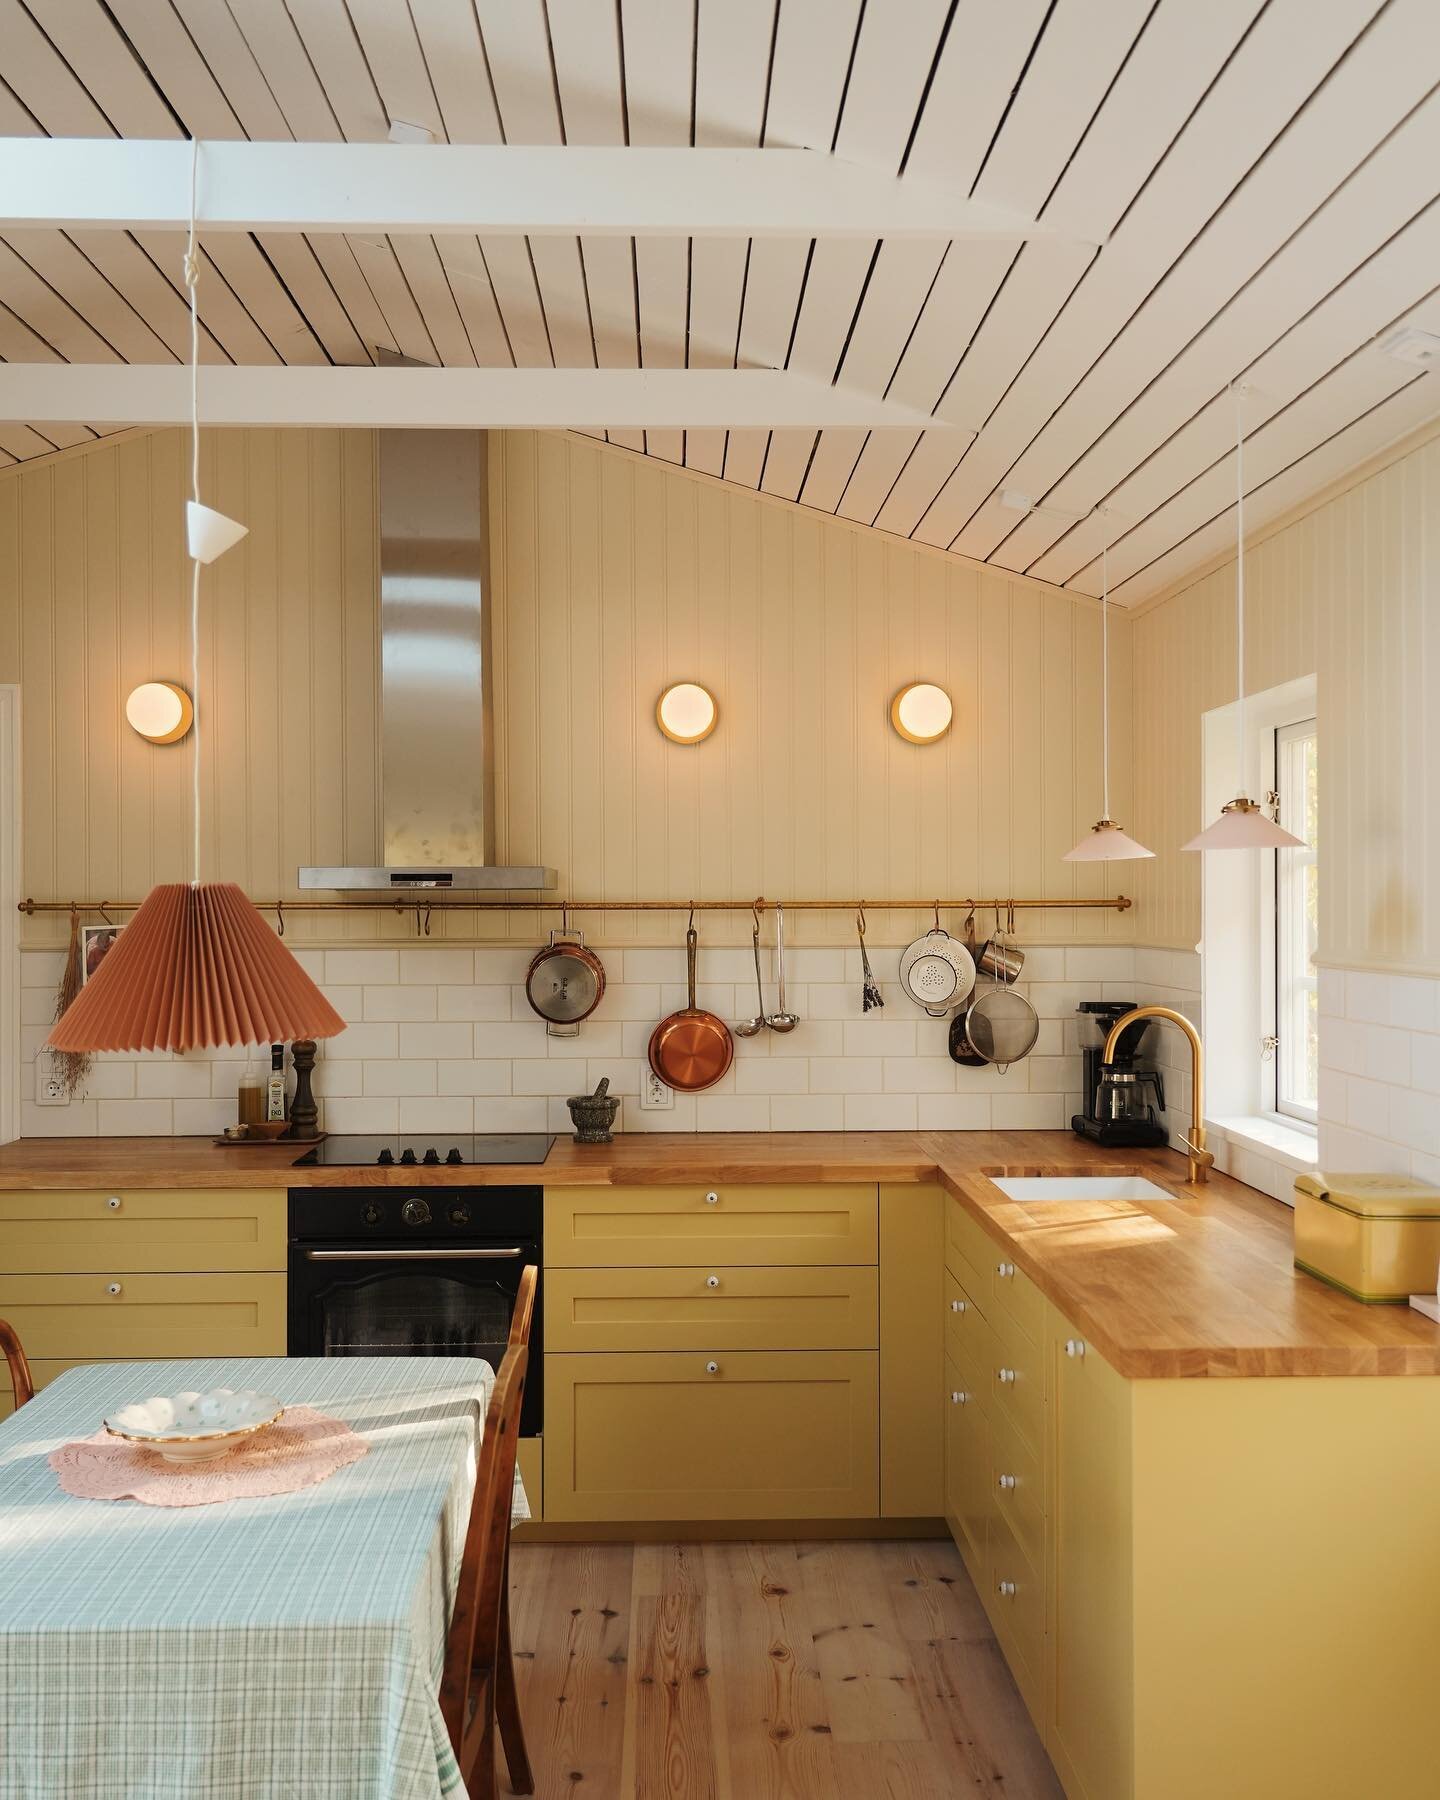 Where are the &lsquo;final images&rsquo; from the kitchen in &Ouml;sterlen? Okayokayokay, here they are! The star of the show being the three @nuuralighting lamps, on the back wall, binding it all together. I&rsquo;m so into how they are both minimal